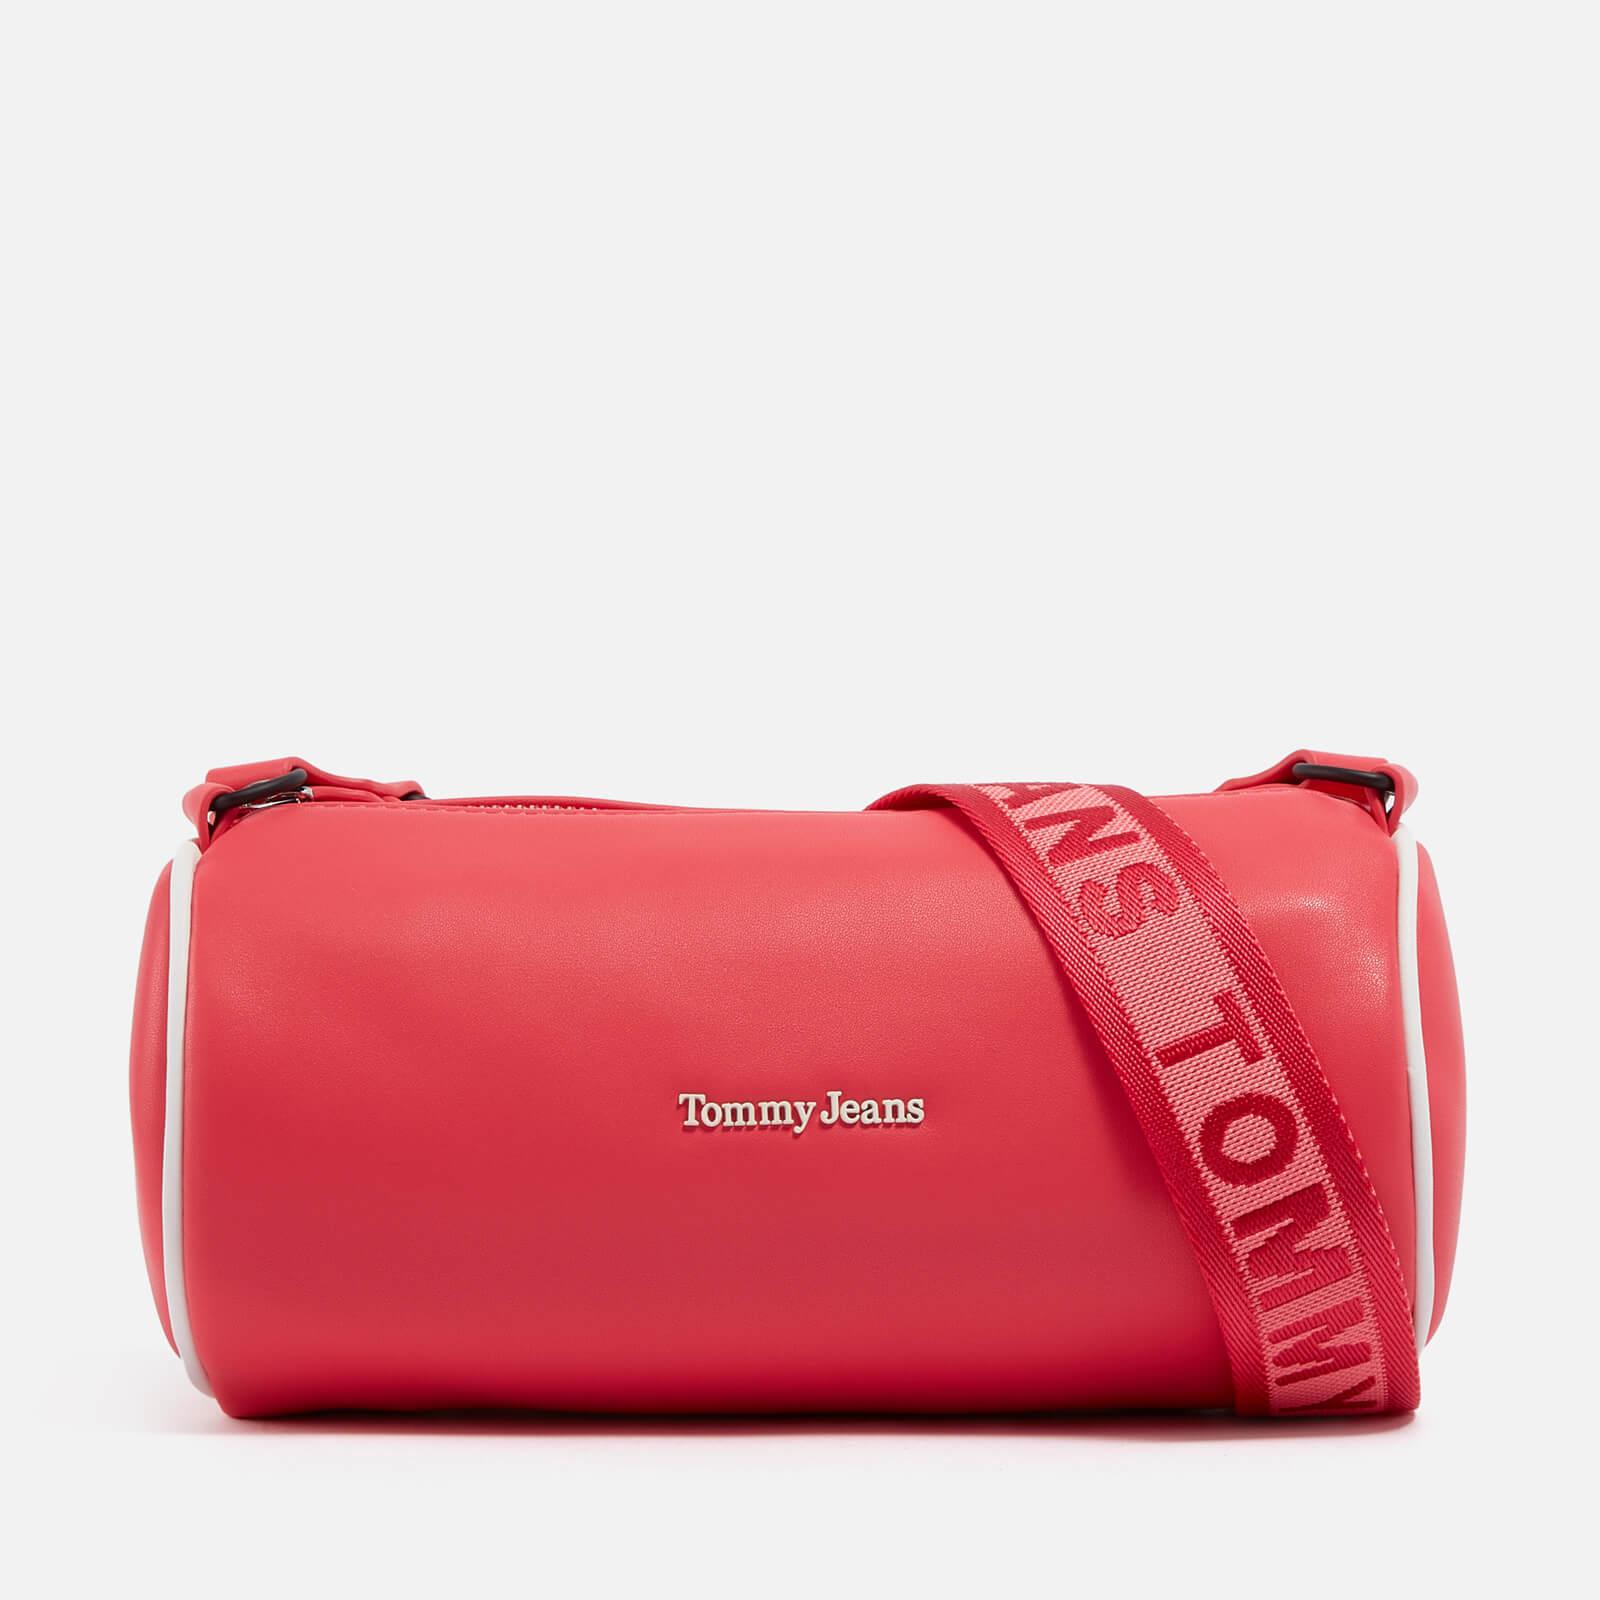 Tommy Hilfiger Stadium Faux Leather Crossbody Bag in Red | Lyst